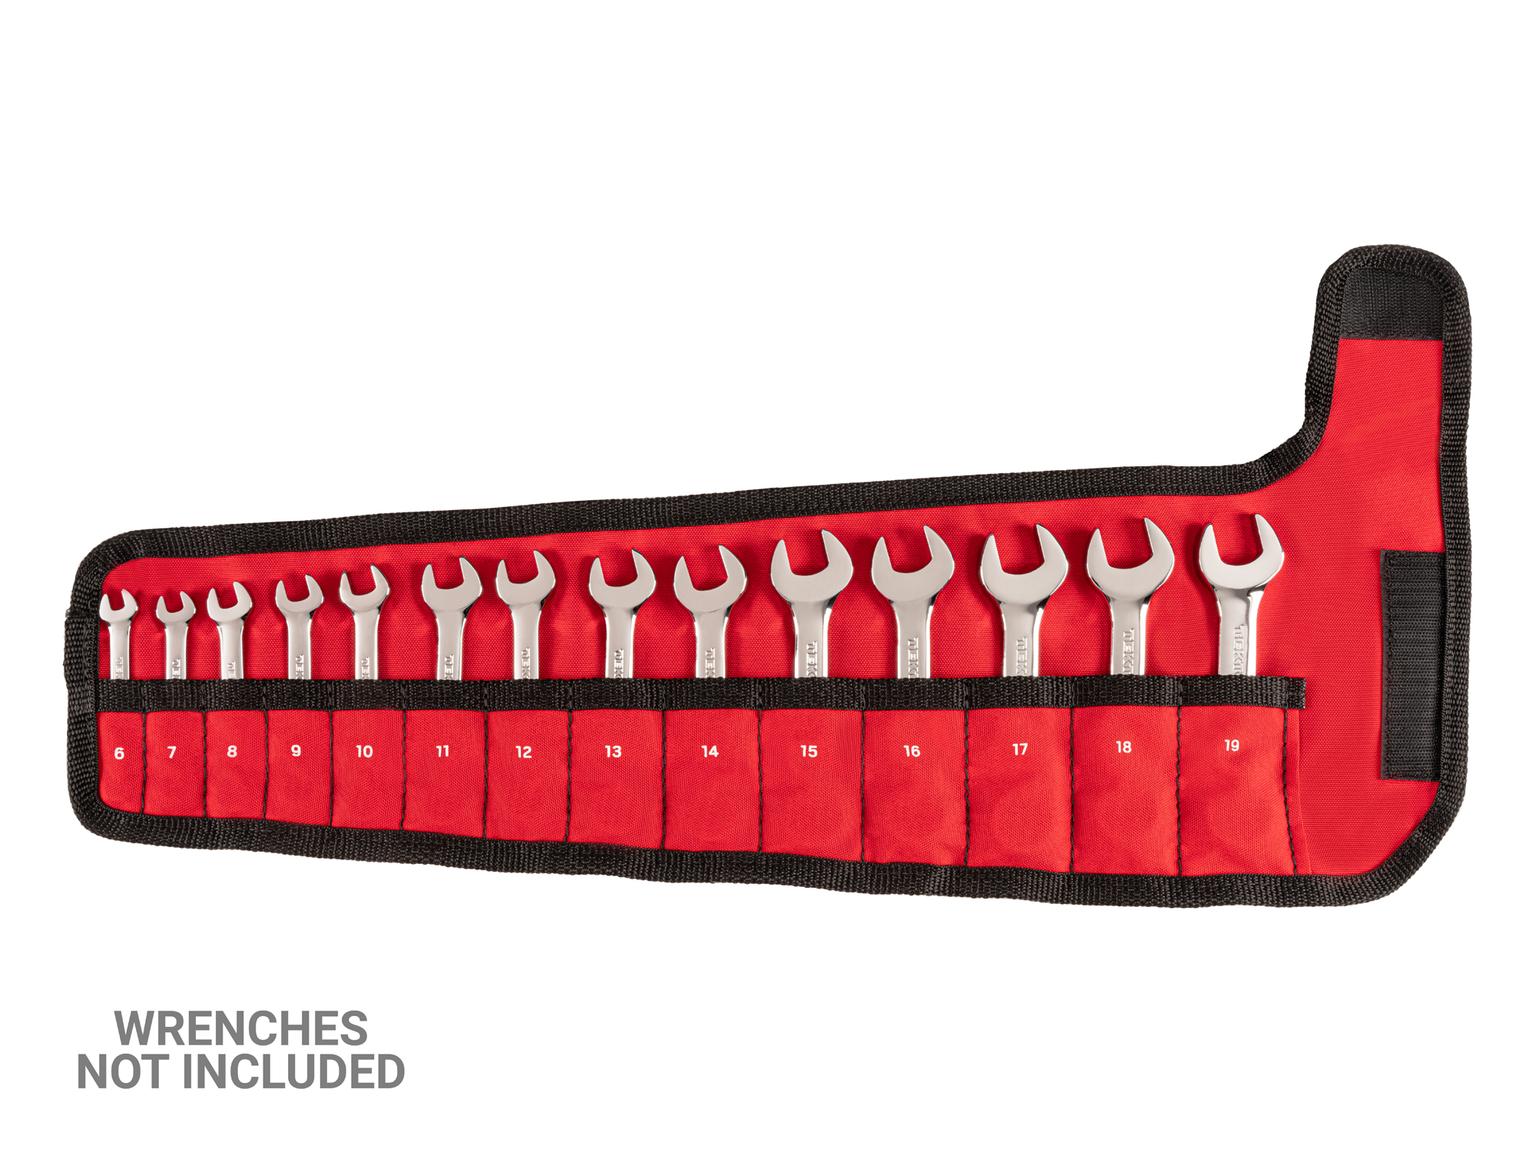 14-Tool Stubby Combination Wrench Pouch (Red) | TEKTON | OTP21206